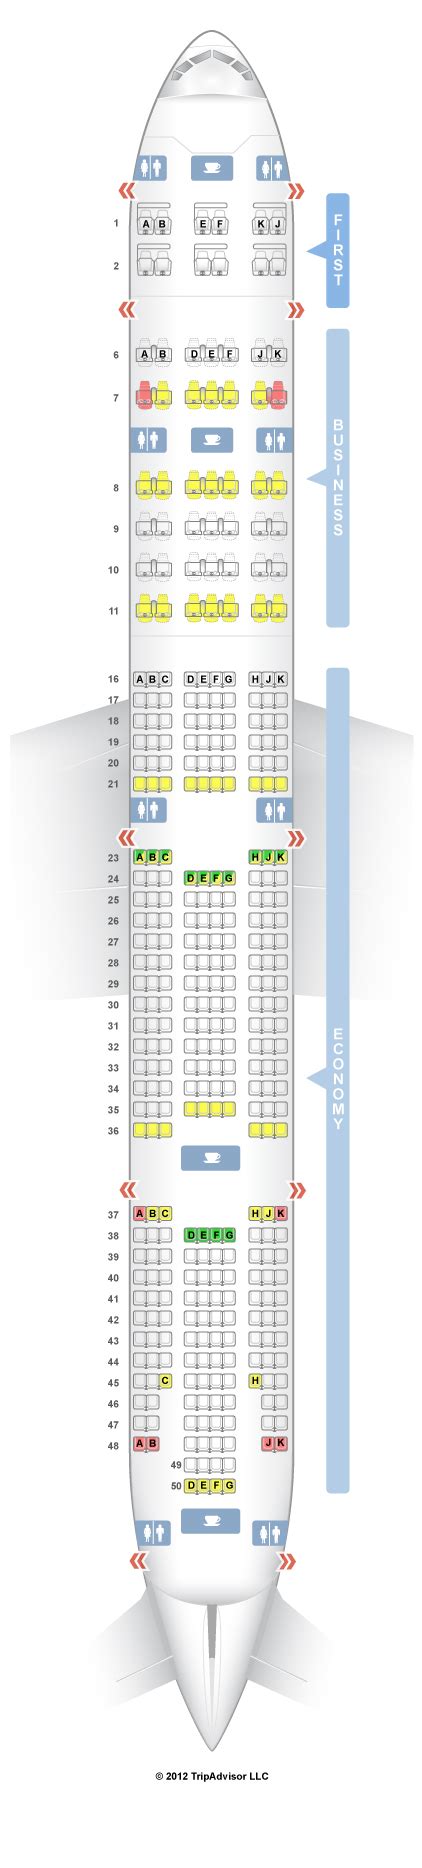 Layout Emirates Boeing 777 300er Seat Map Images And Photos Finder